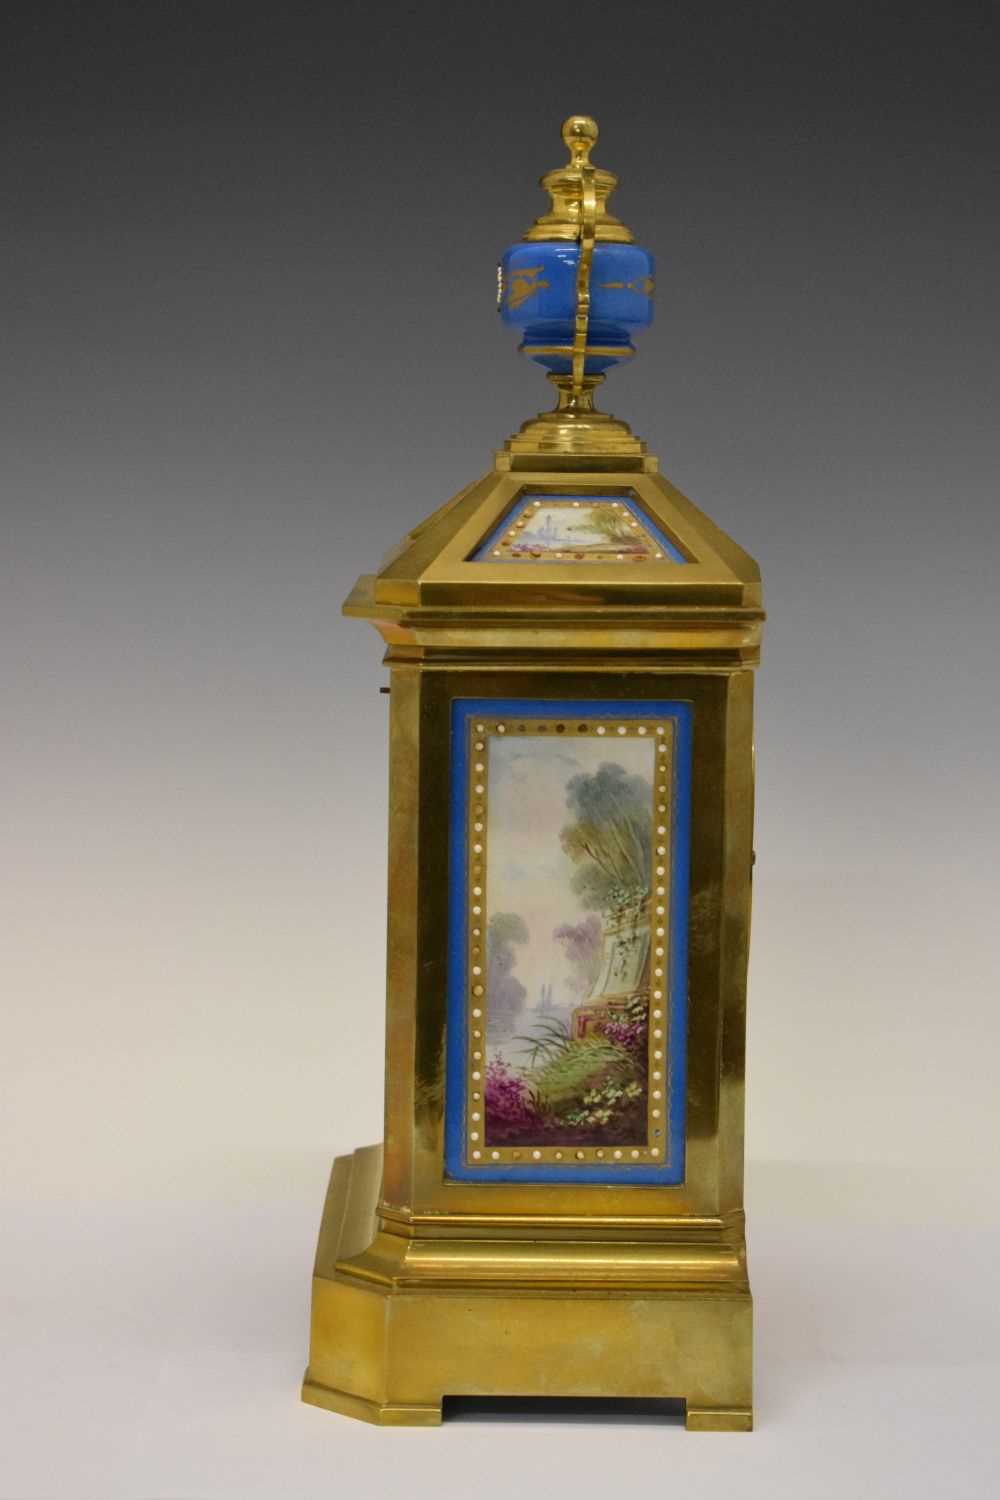 Mid 19th Century French Sevres-style porcelain mounted mantel clock - Image 7 of 13